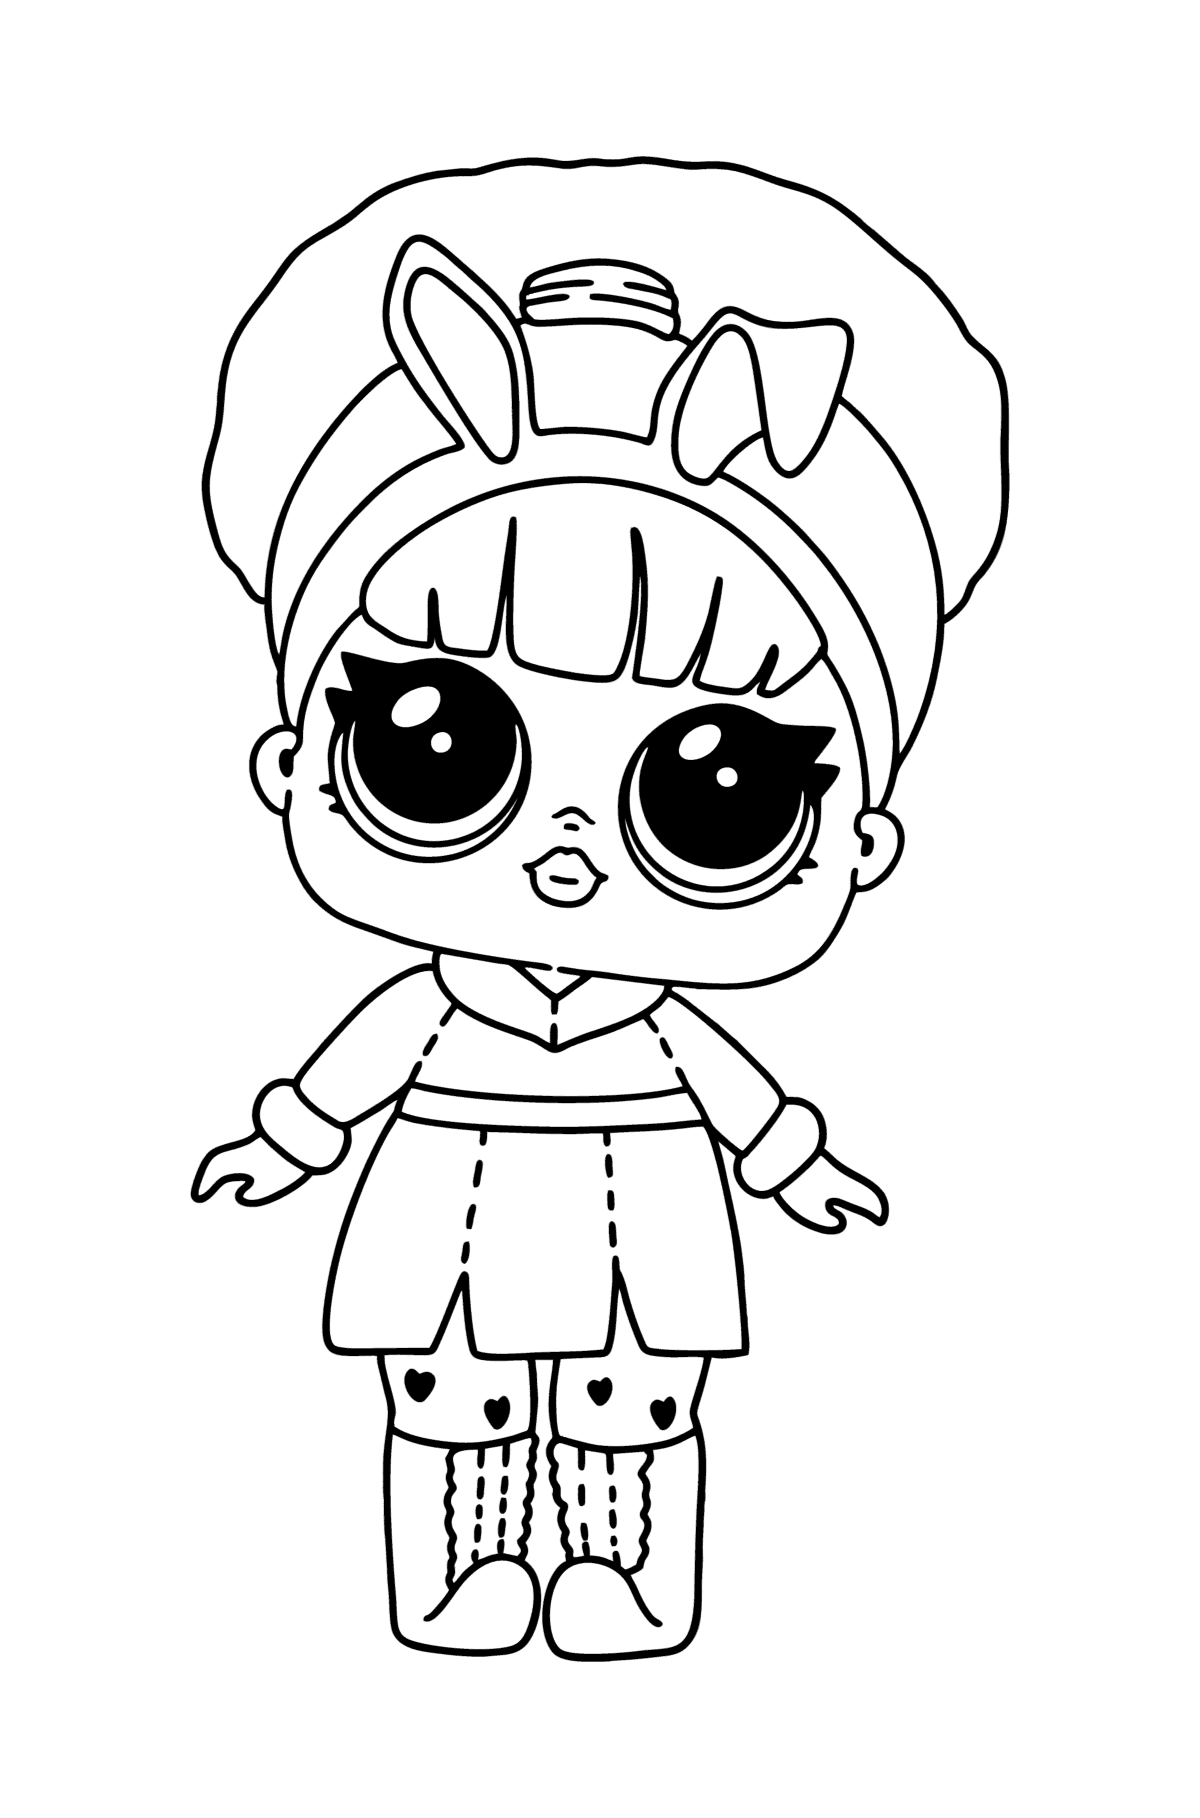 LOL Surprise Snow bunny coloring page - Coloring Pages for Kids